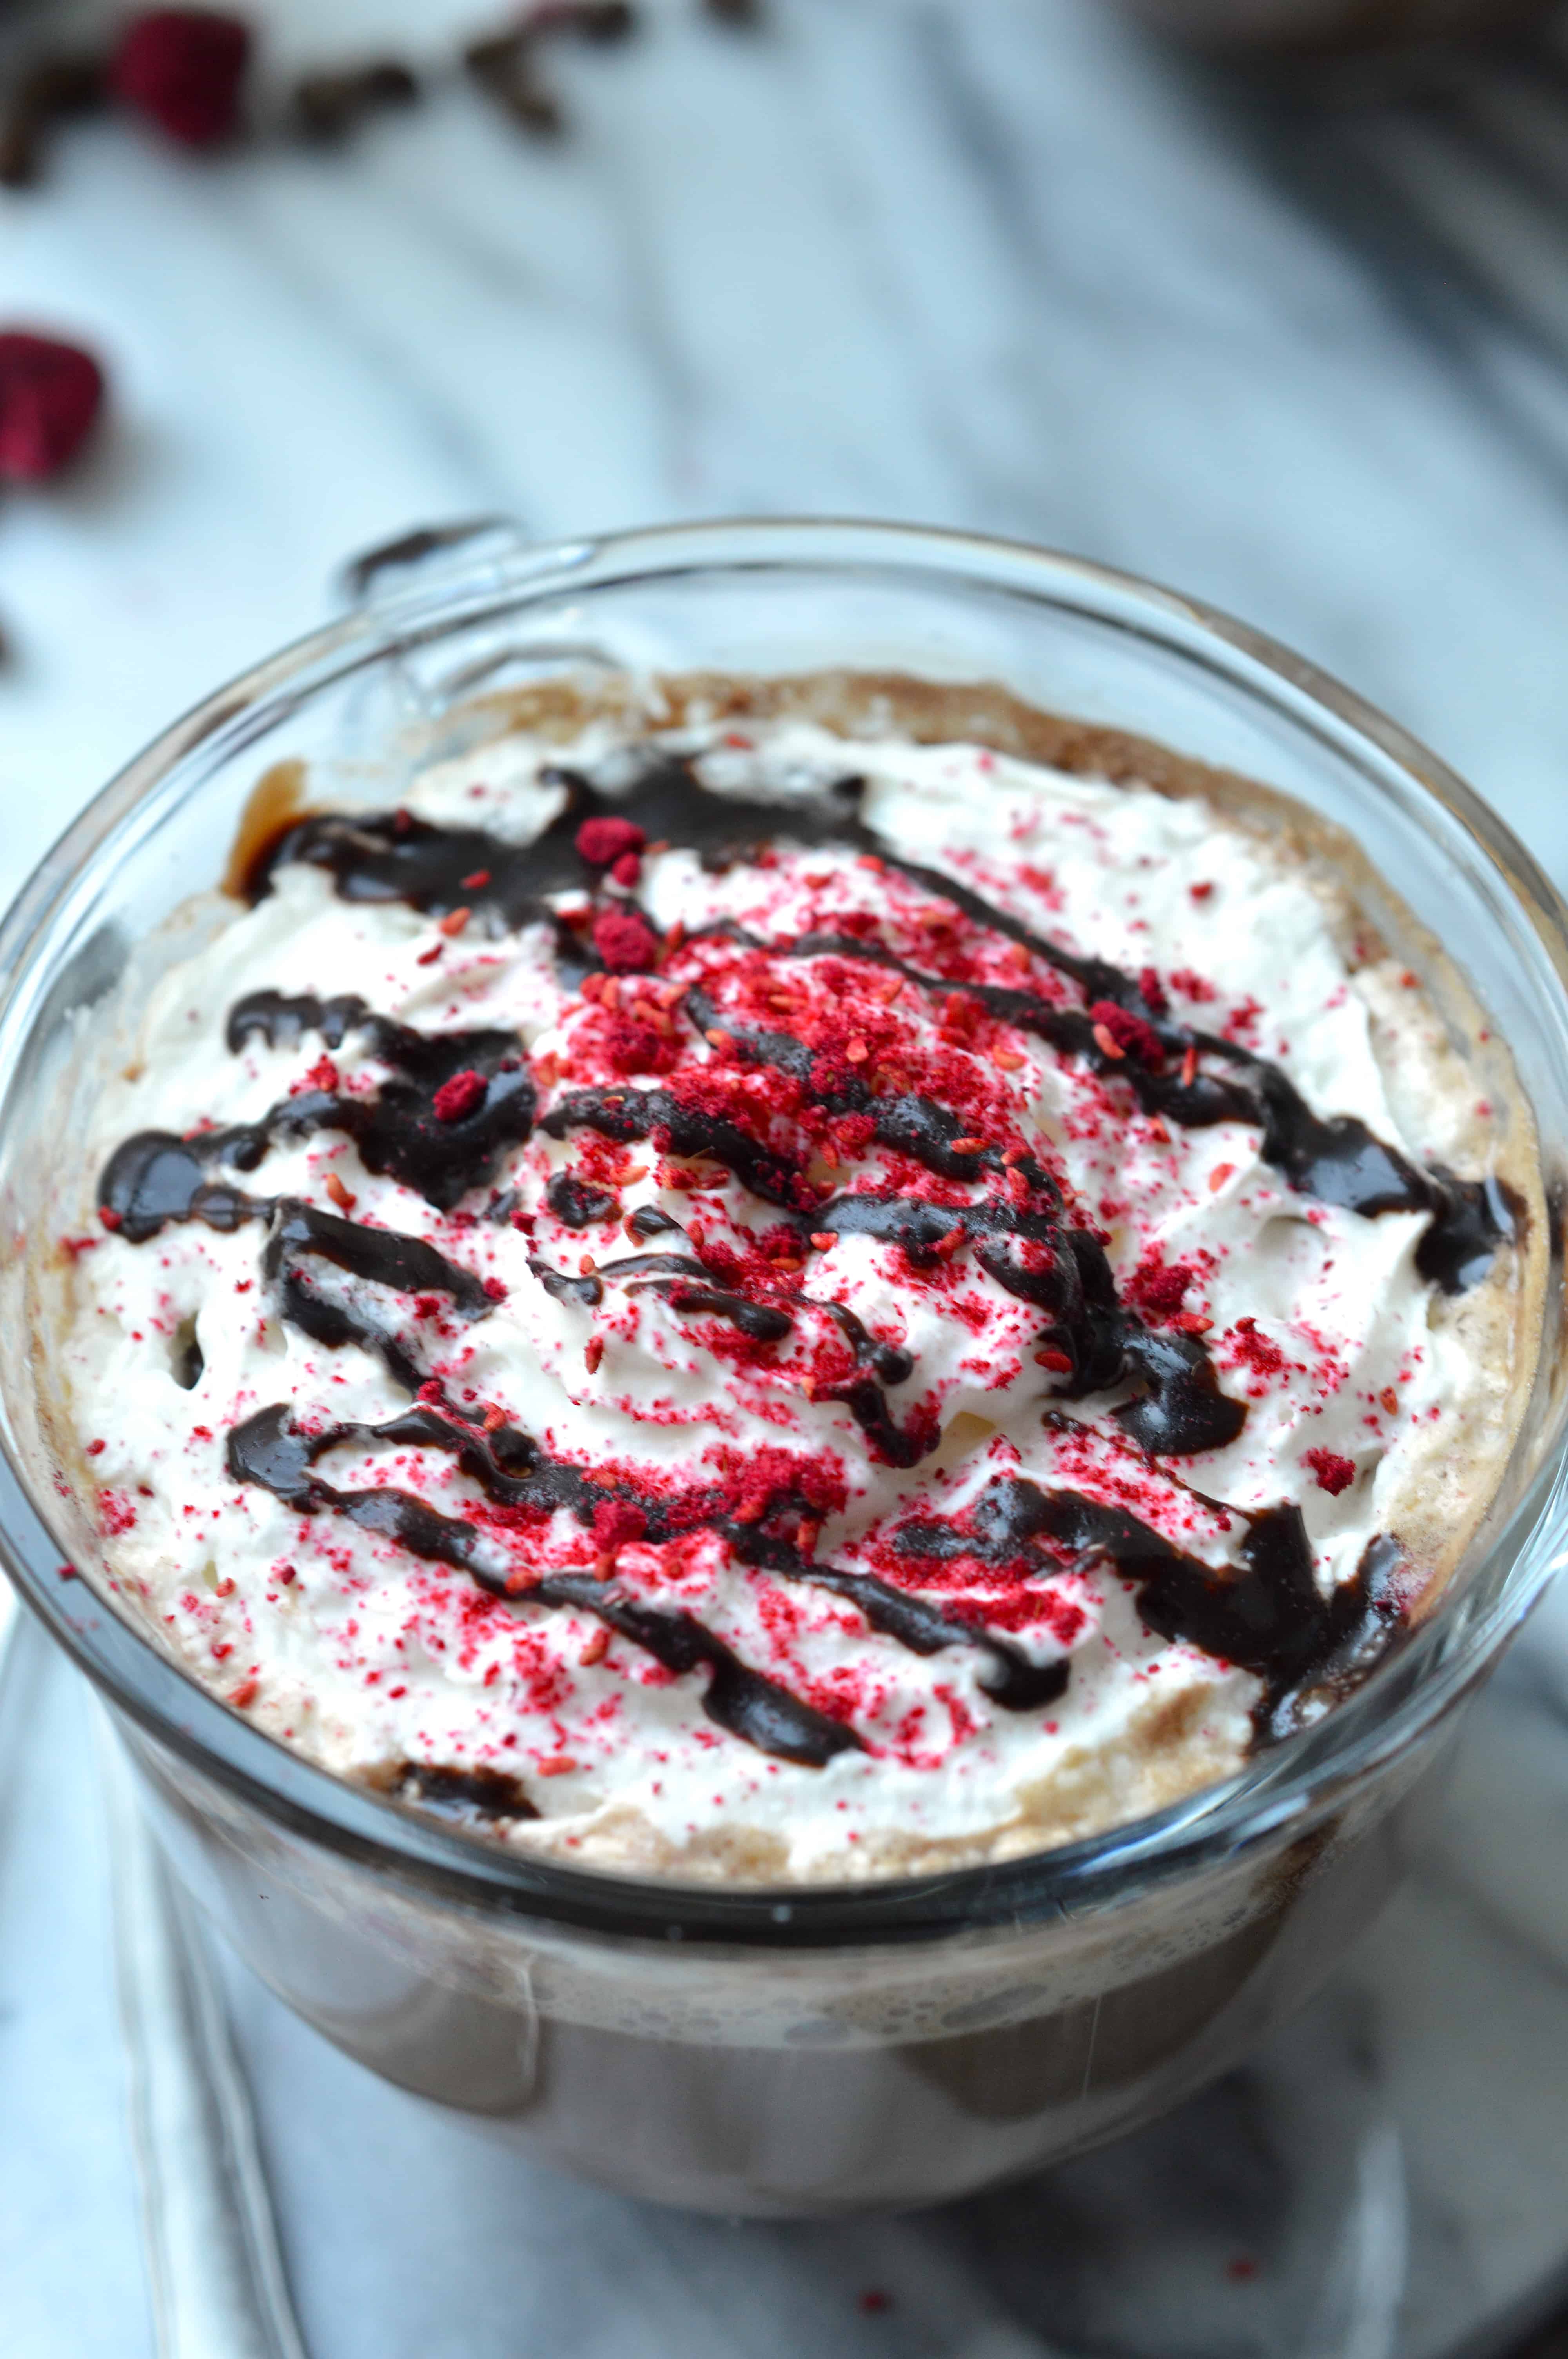 This decadent and rich Raspberry Mocha hits all the right notes - deeply chocolaty and rich, slightly sweet from raspberries and topped with cool whipped cream. Make your own coffeehouse favorite at home for a fraction of the cost.